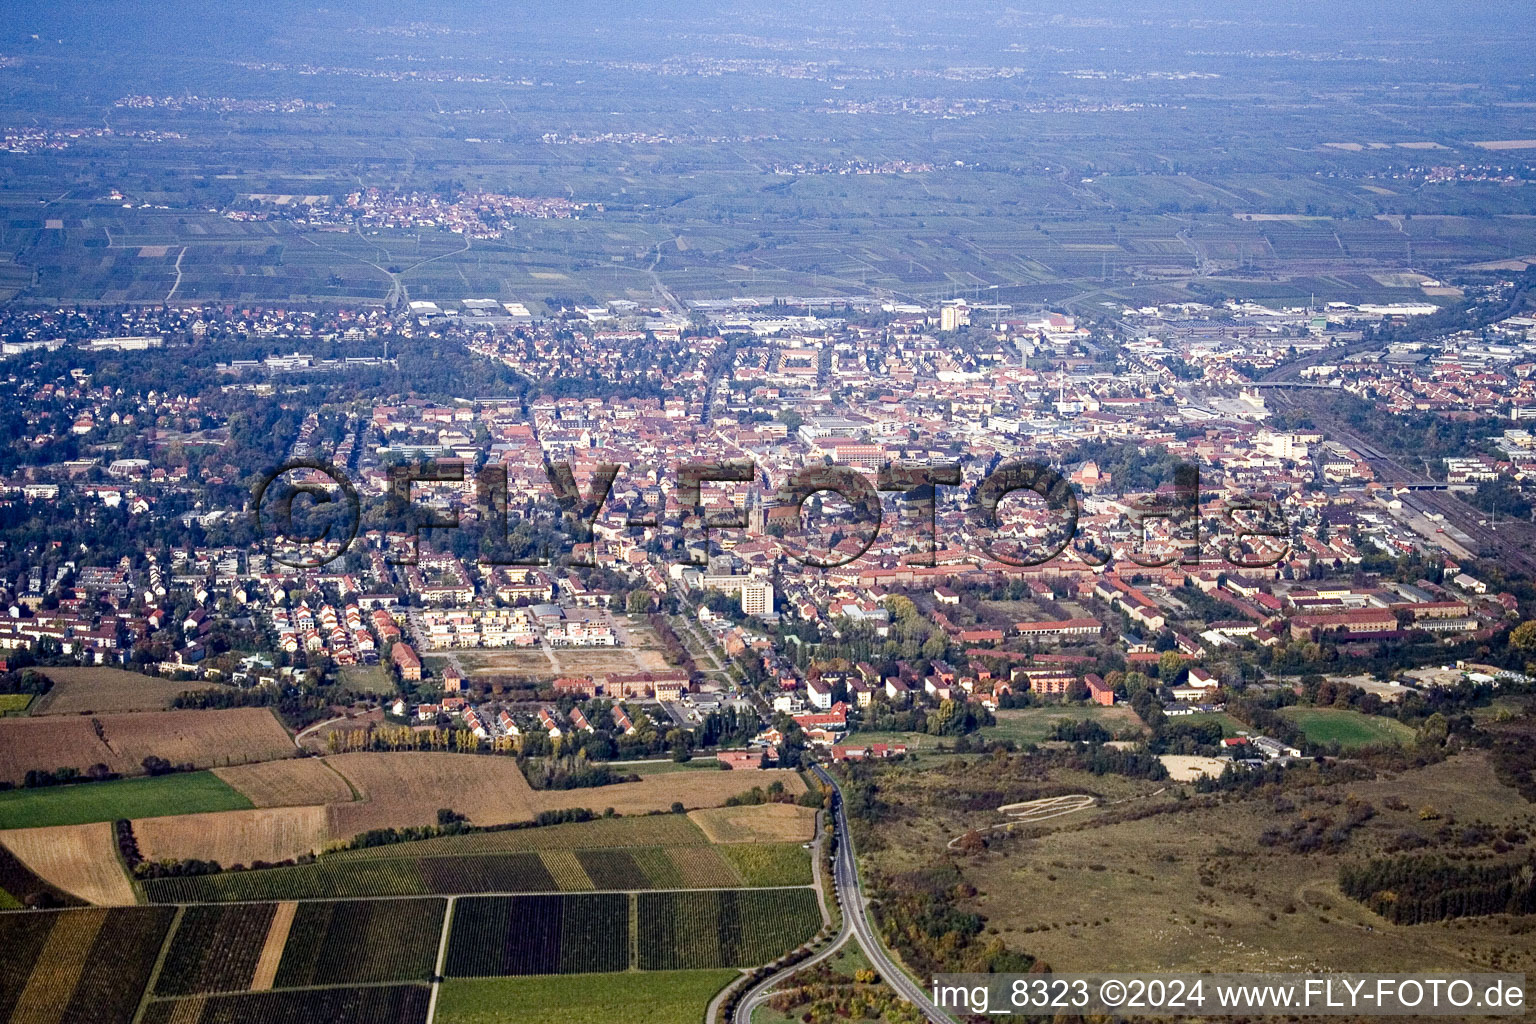 Aerial view of From the south in Landau in der Pfalz in the state Rhineland-Palatinate, Germany